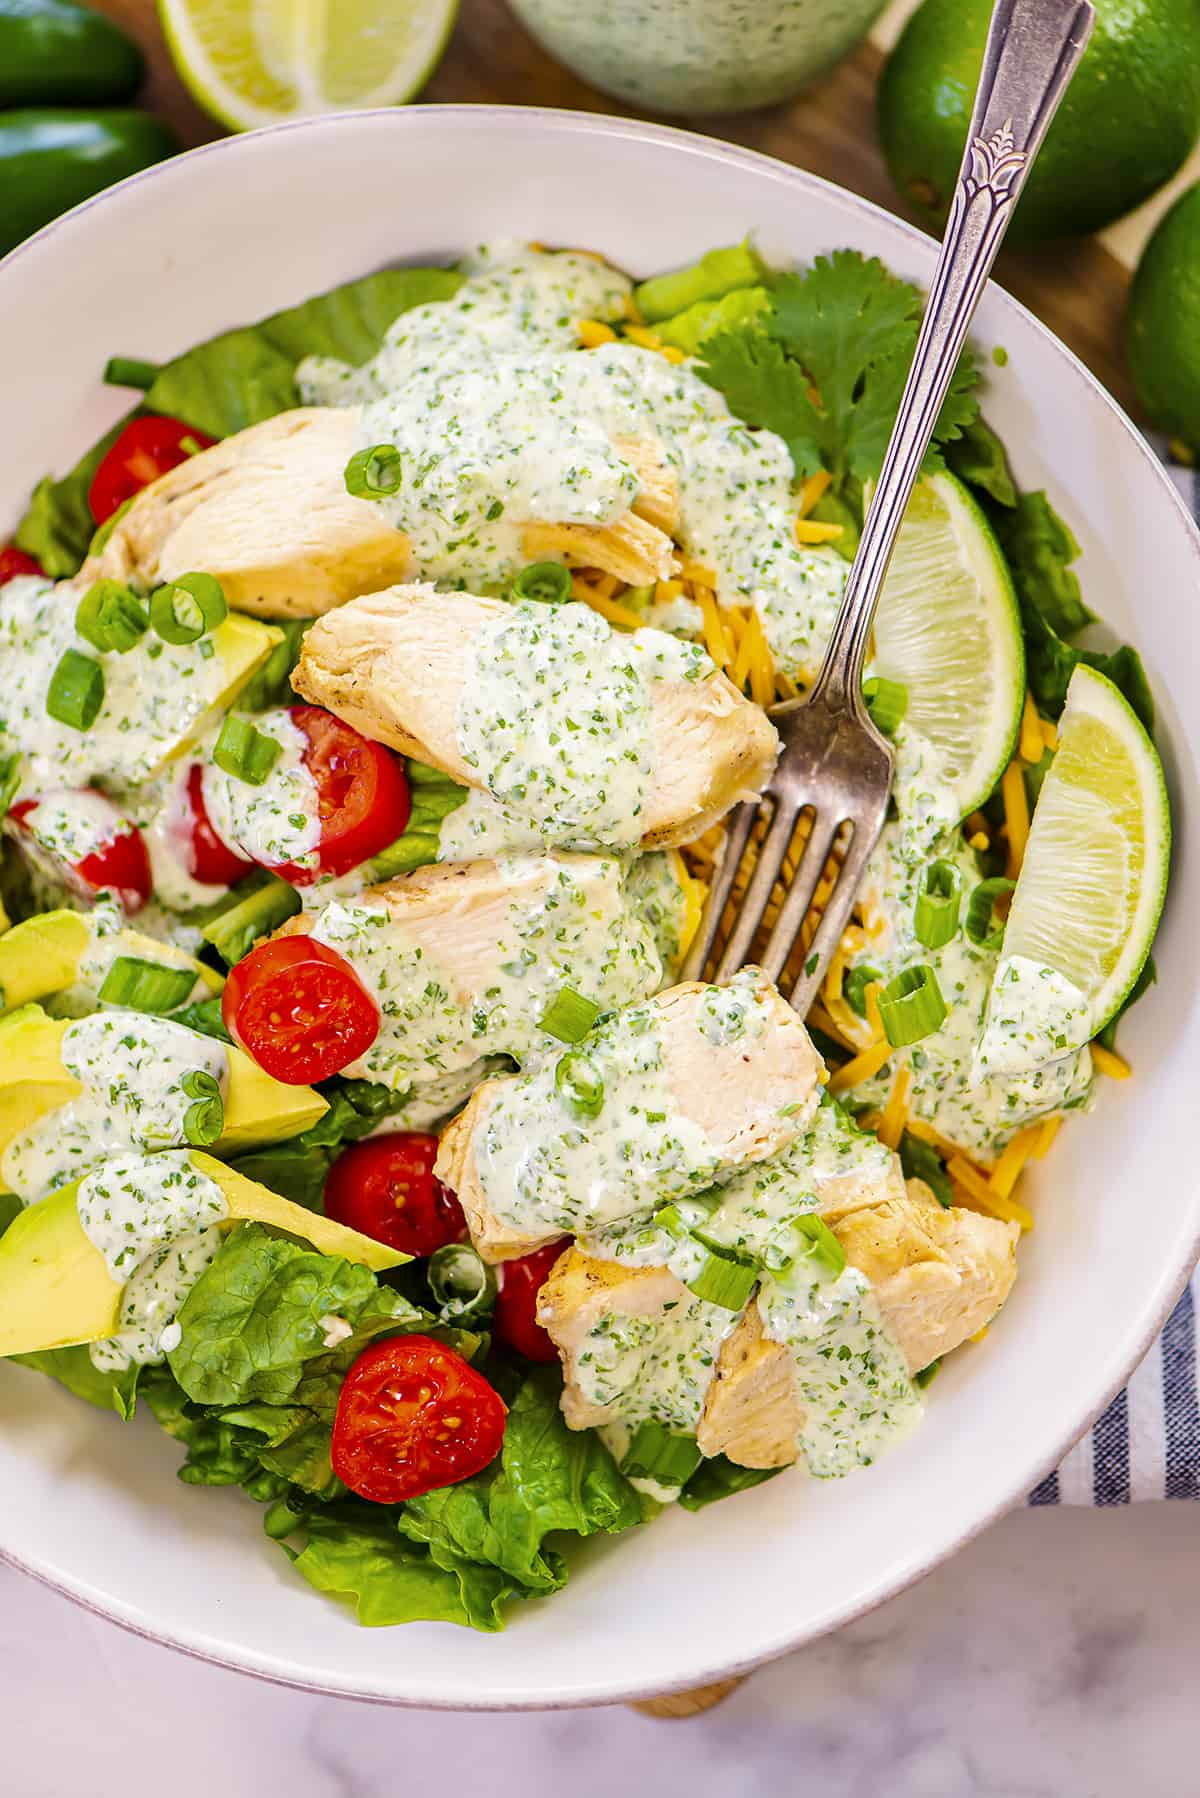 Garden salad topped with chicken and cilantro lime salad dressing.